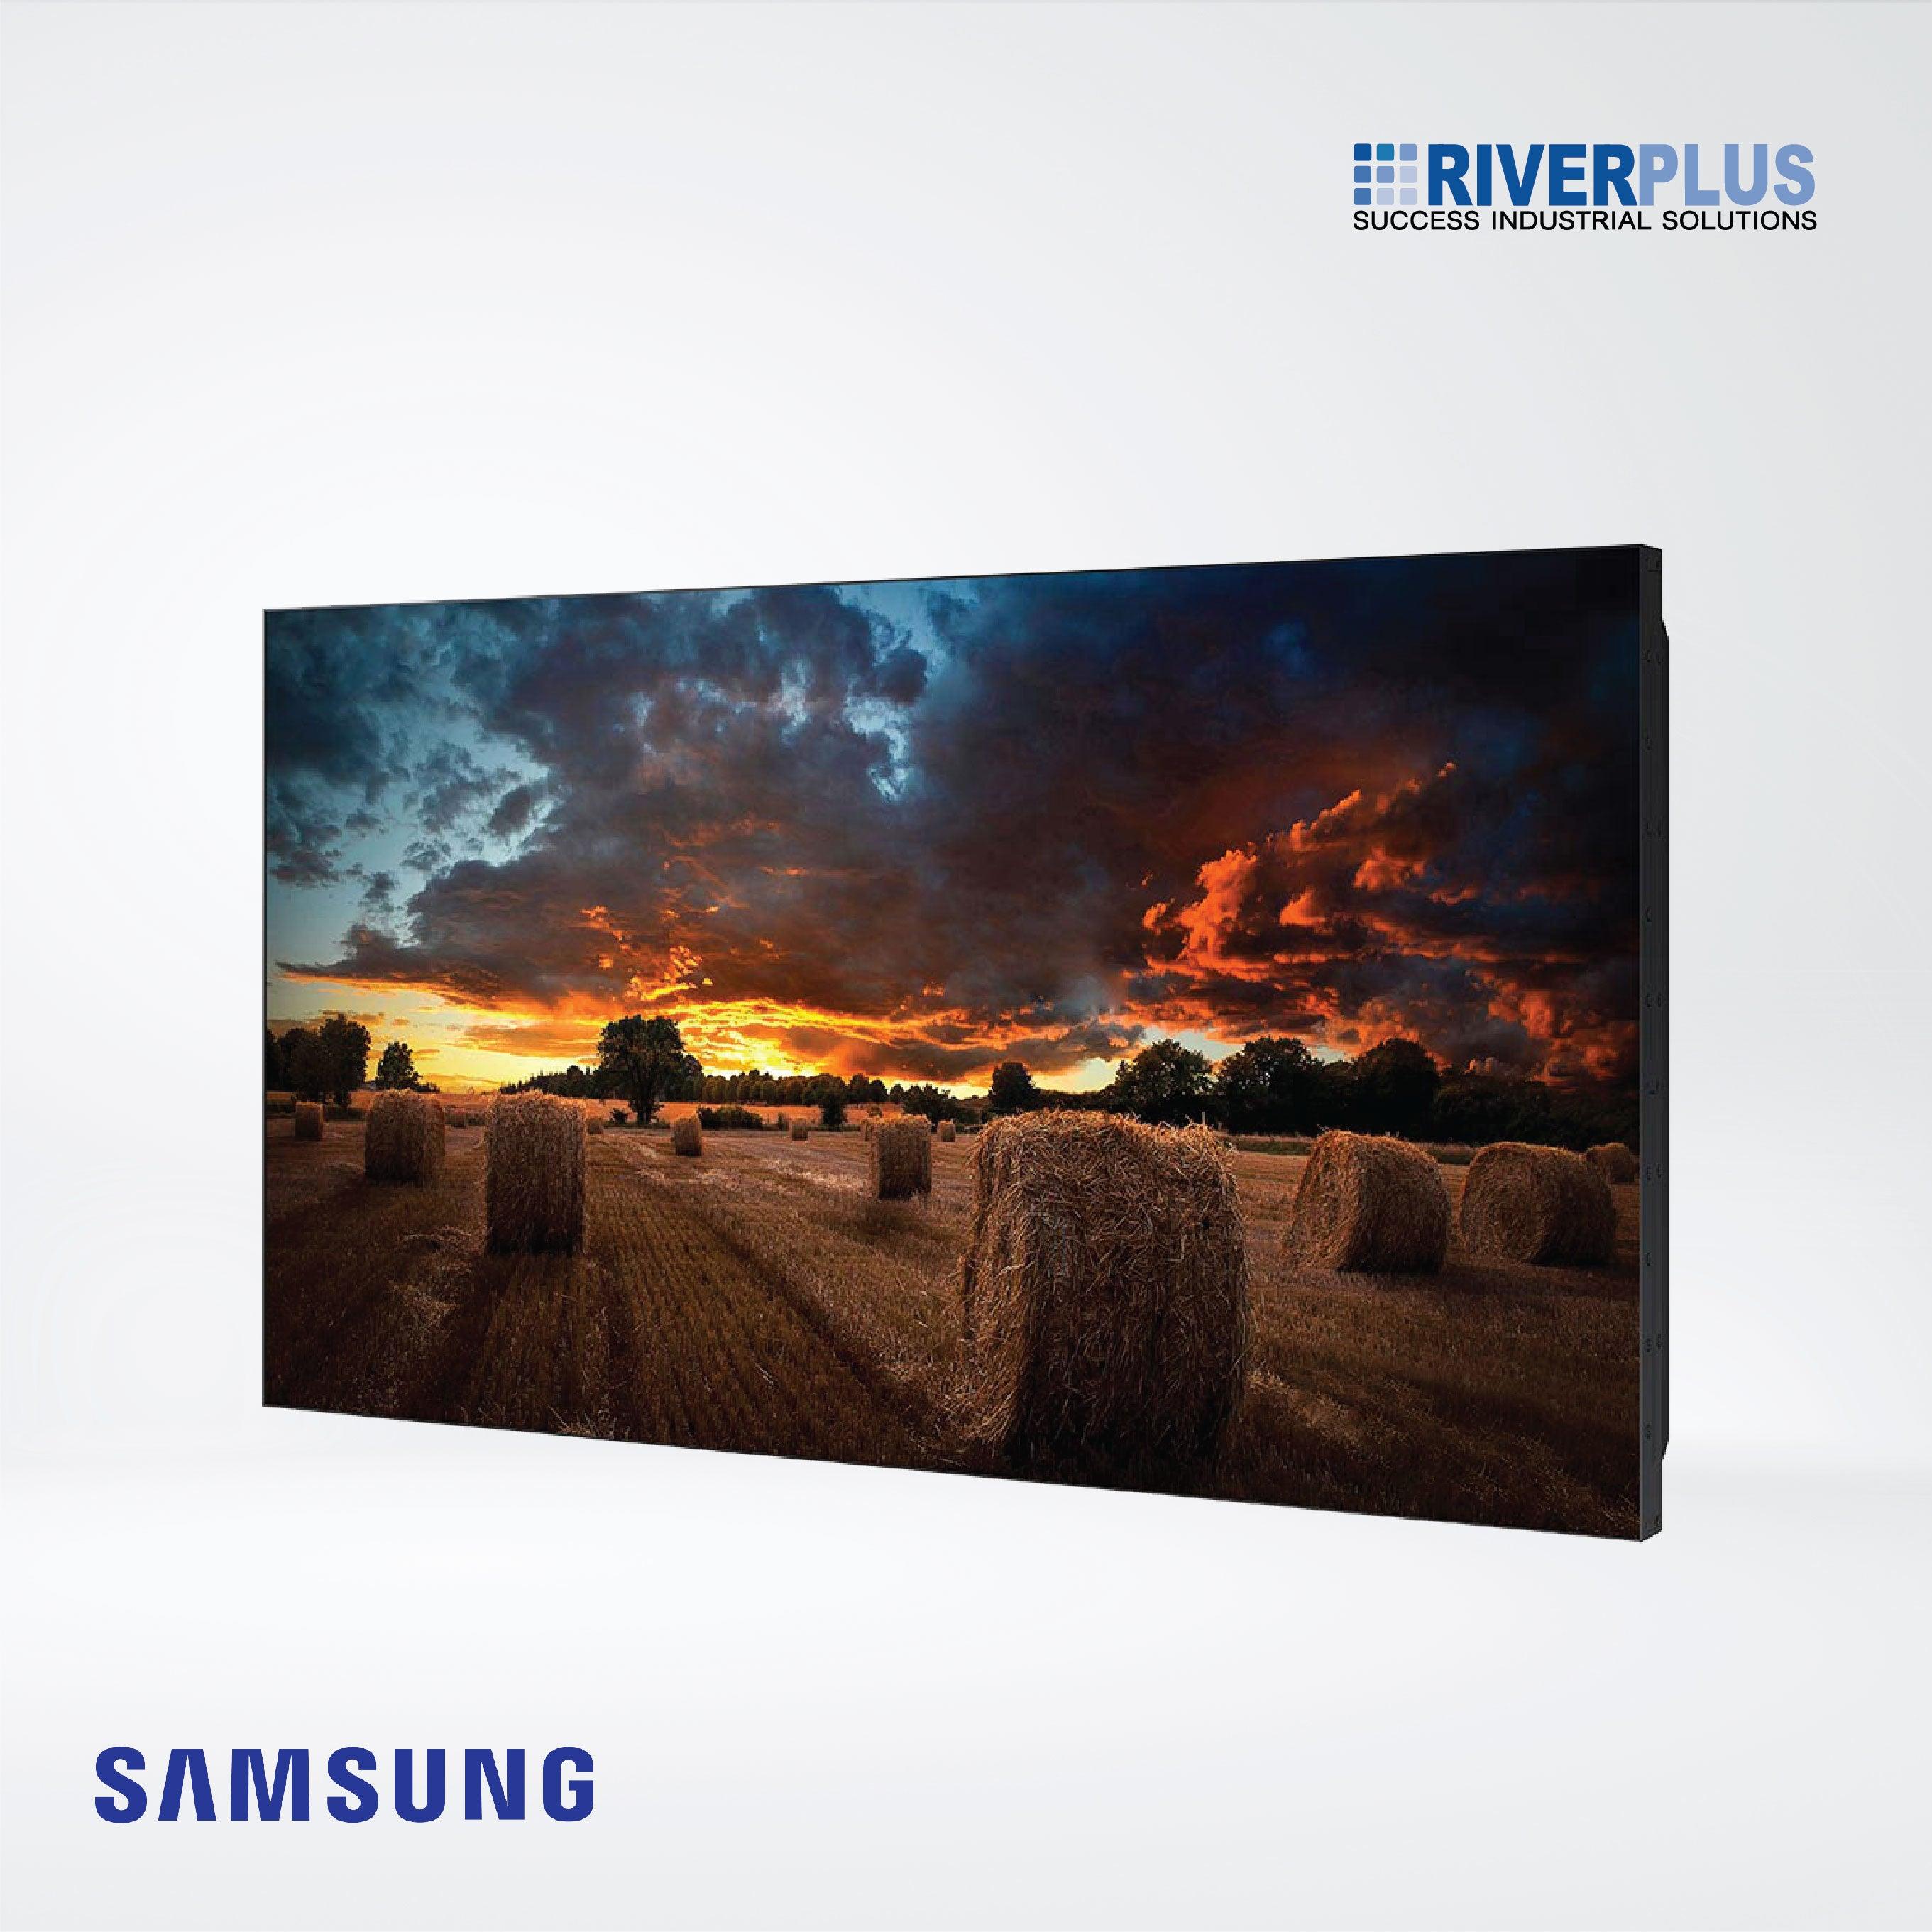 VM46T-U 46” Max 500nit Always-on, space-saving solution delivering a seamless visual experience - Riverplus